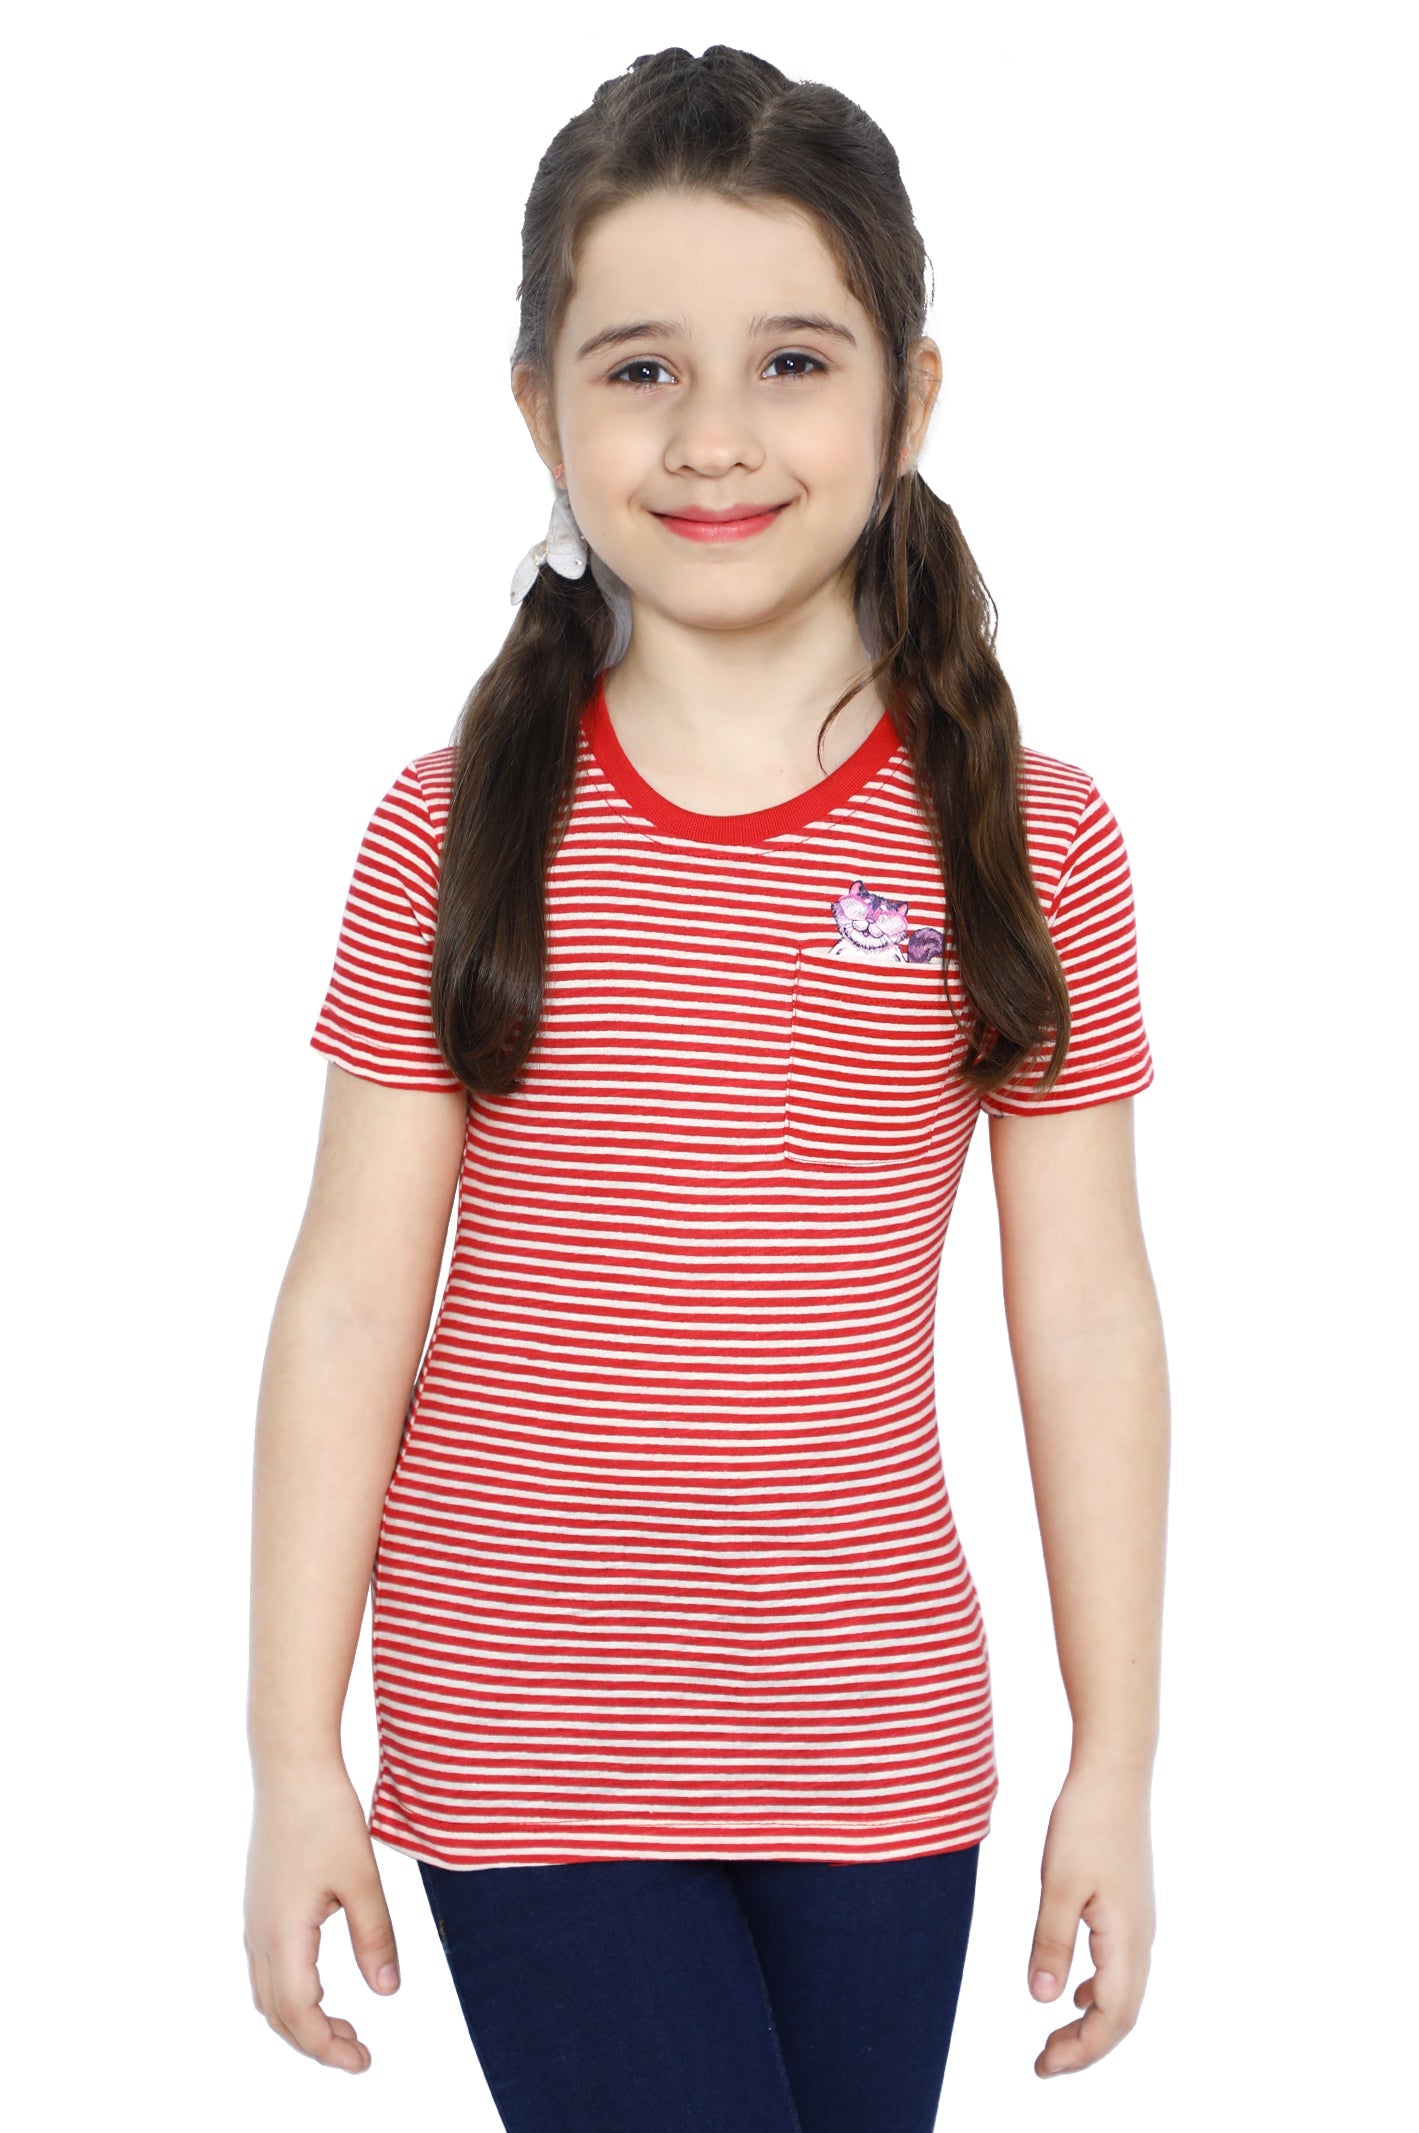 Girls T-Shirt In Red SKU: KGA-0196-RED - Diners